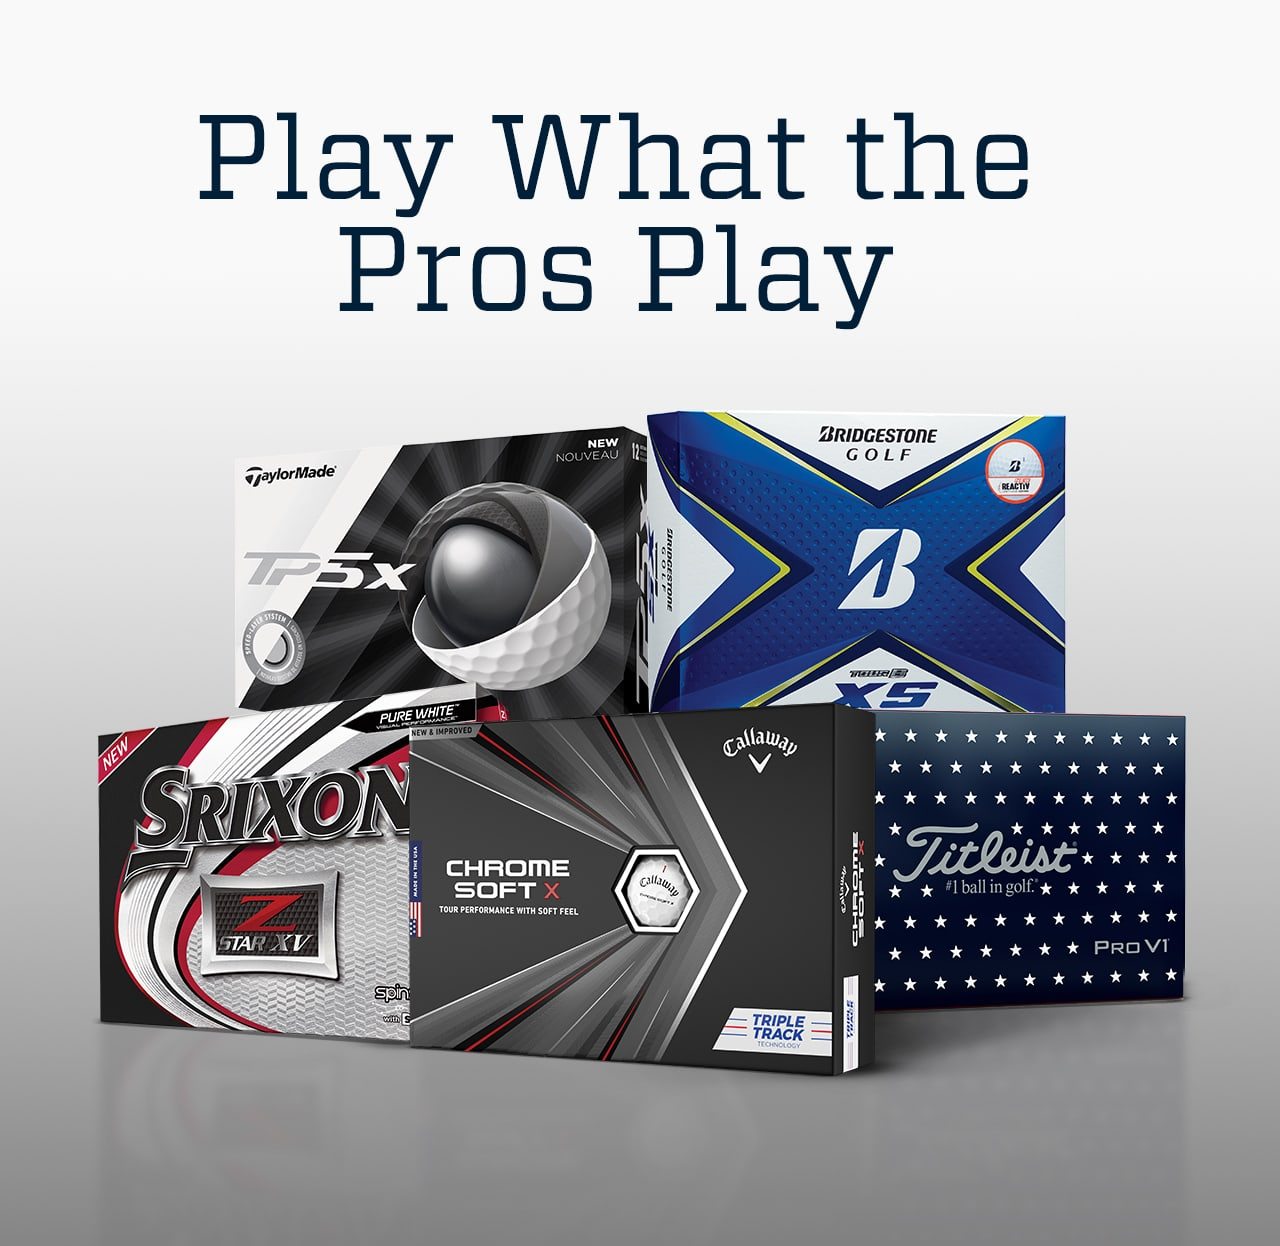 Play what the pros plays.